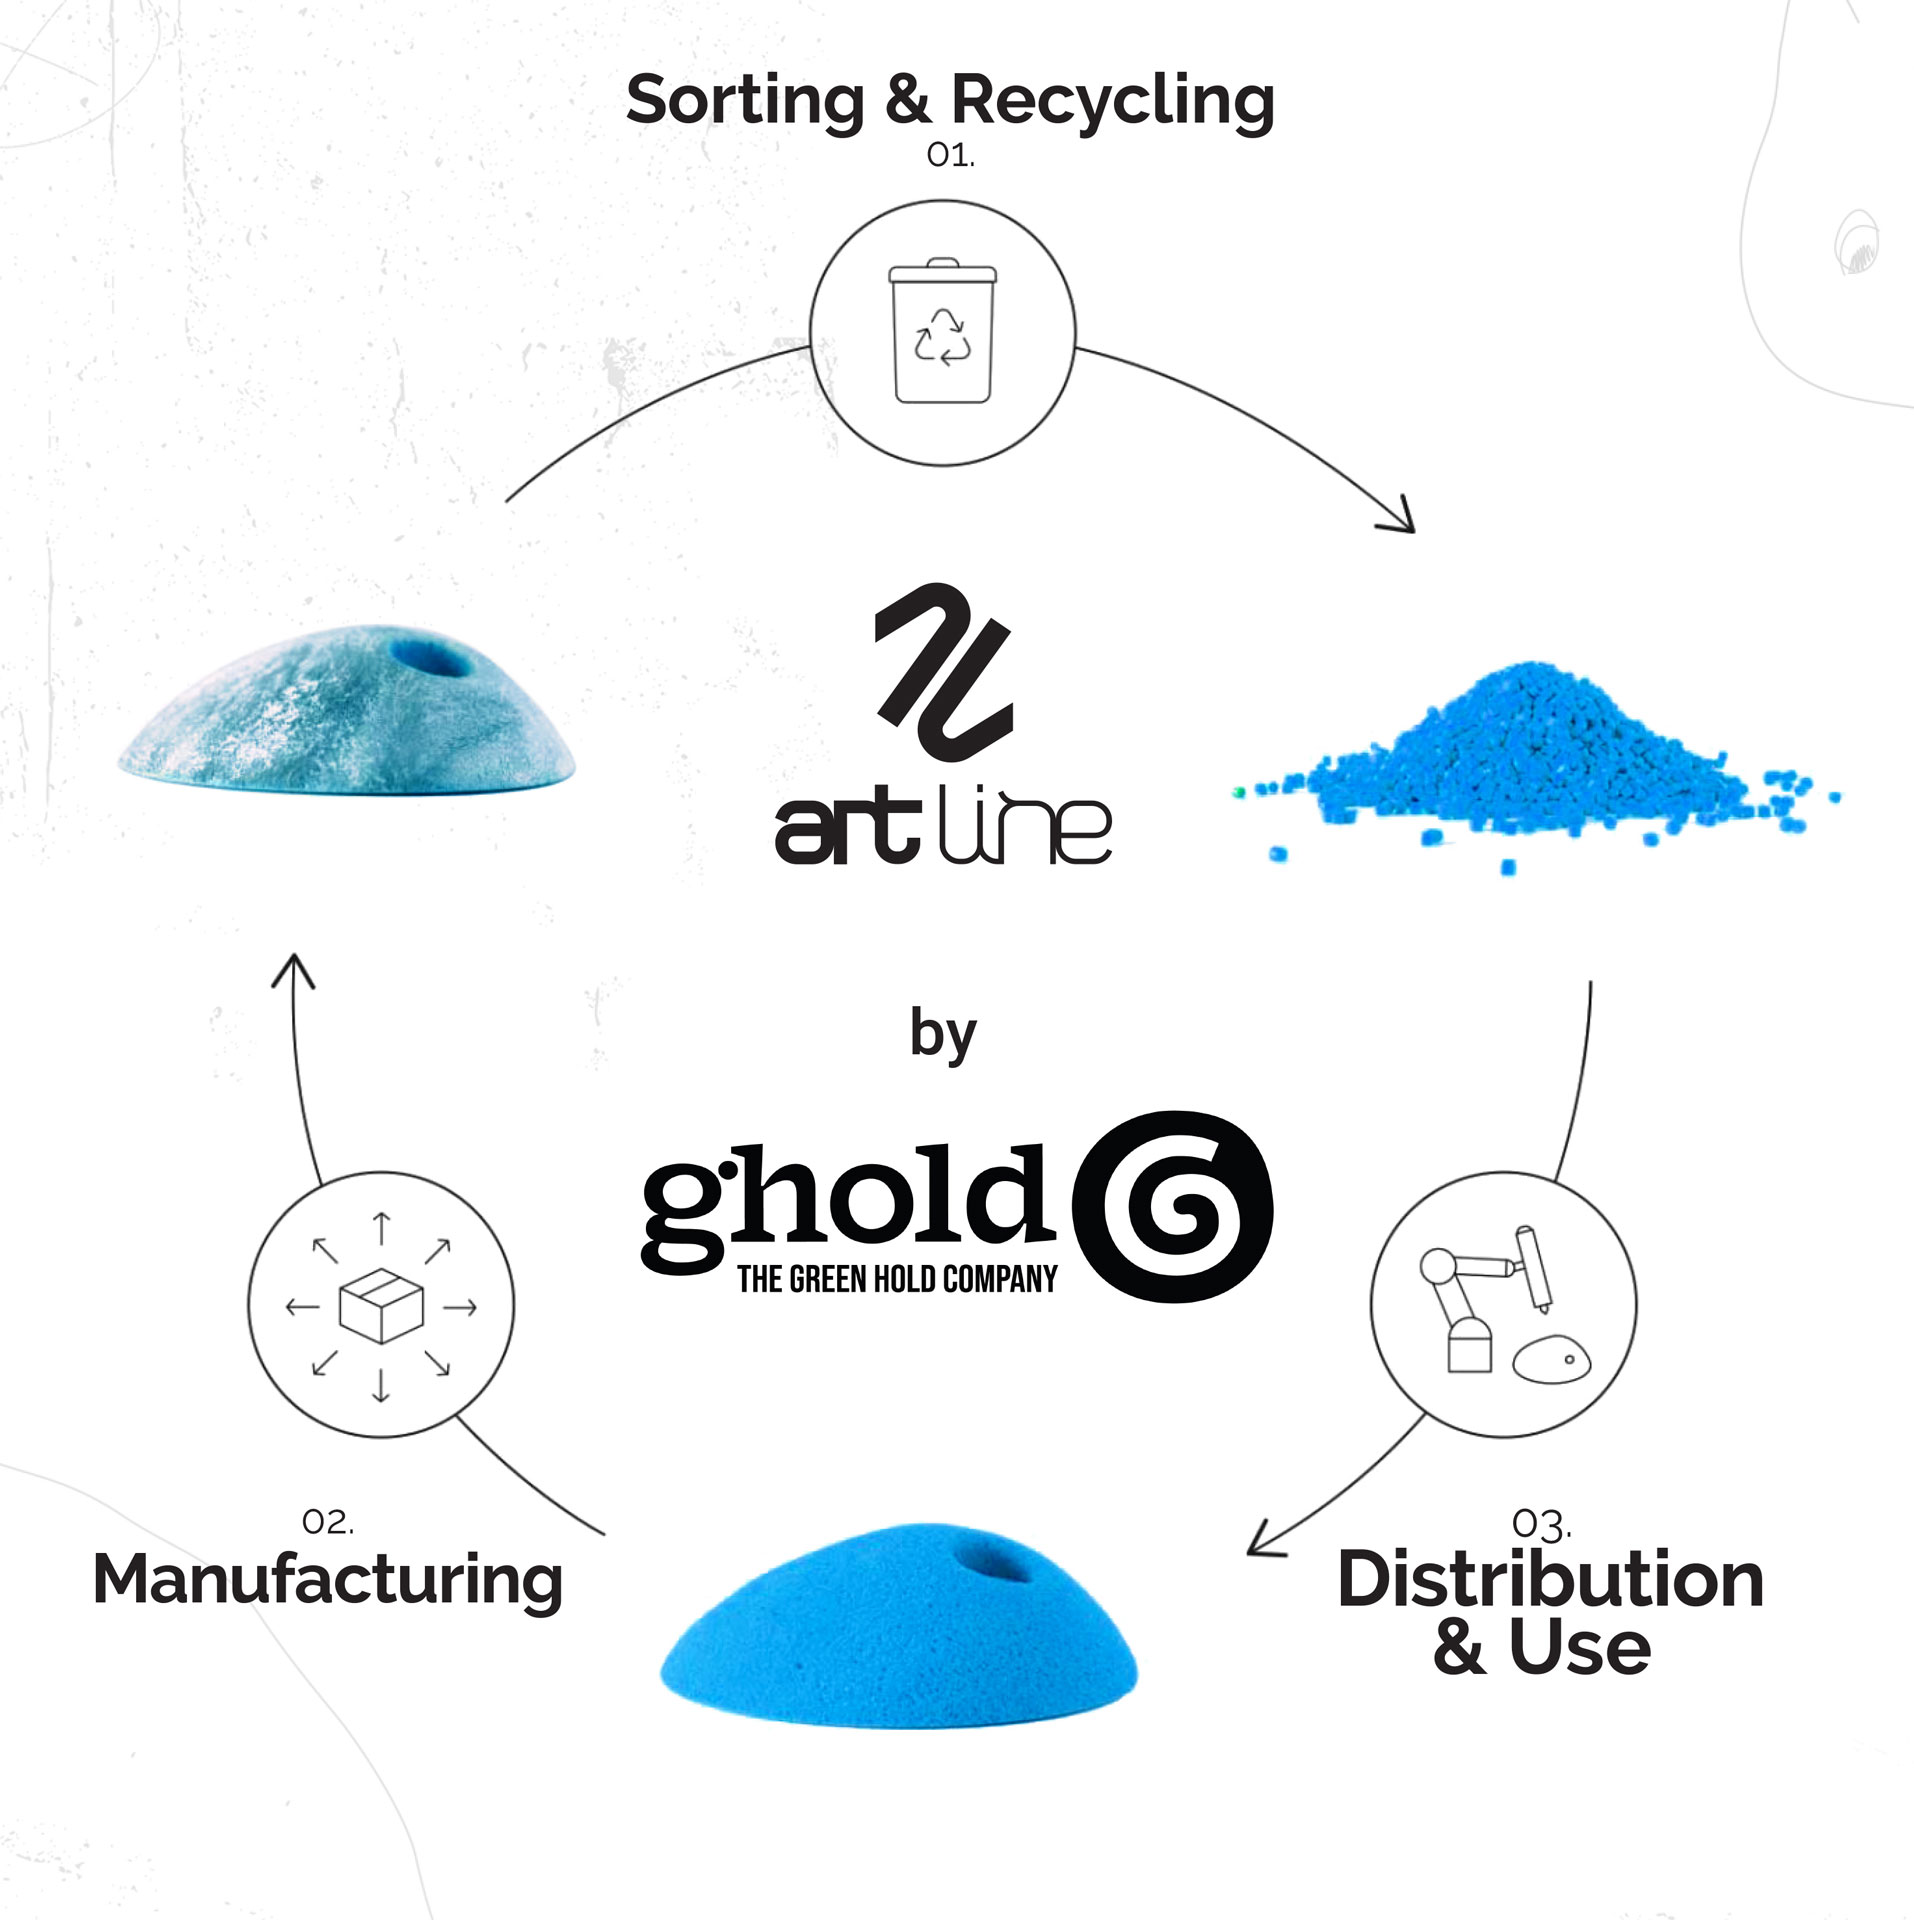 ArtLine and Ghold recyclable hold life cycle